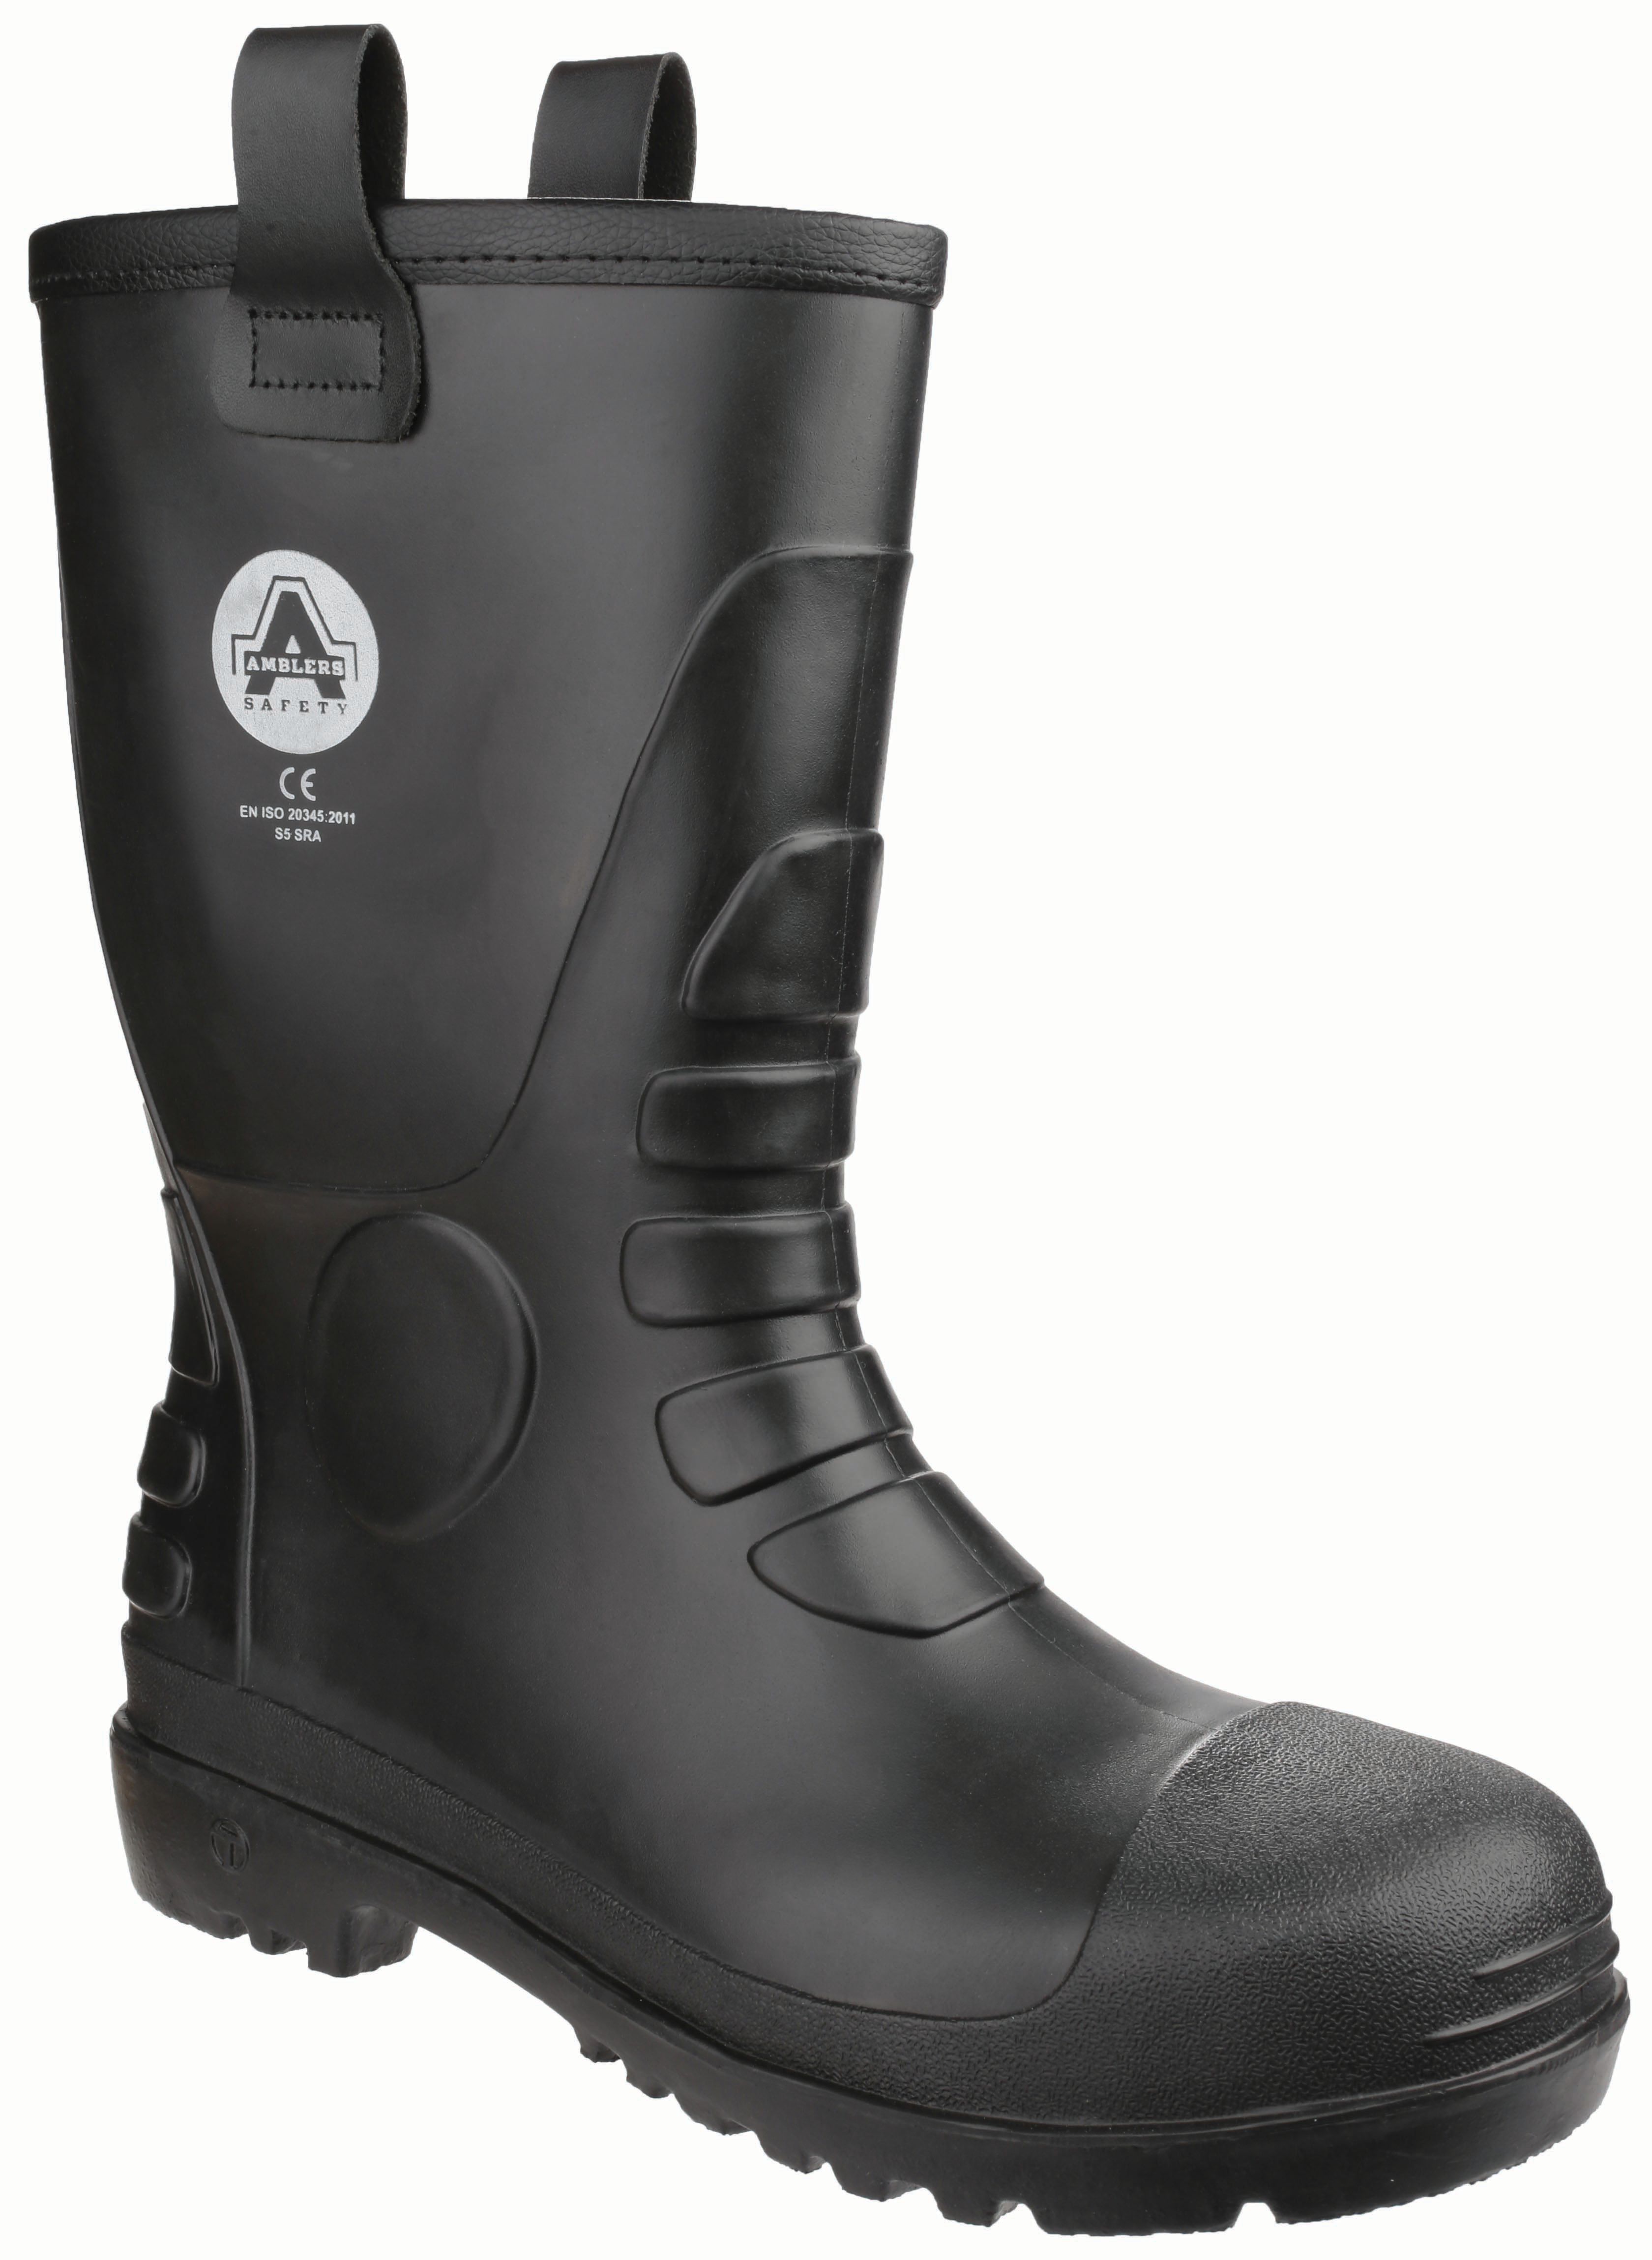 Image of Amblers Safety FS90 Rigger Safety Boot - Black Size 11